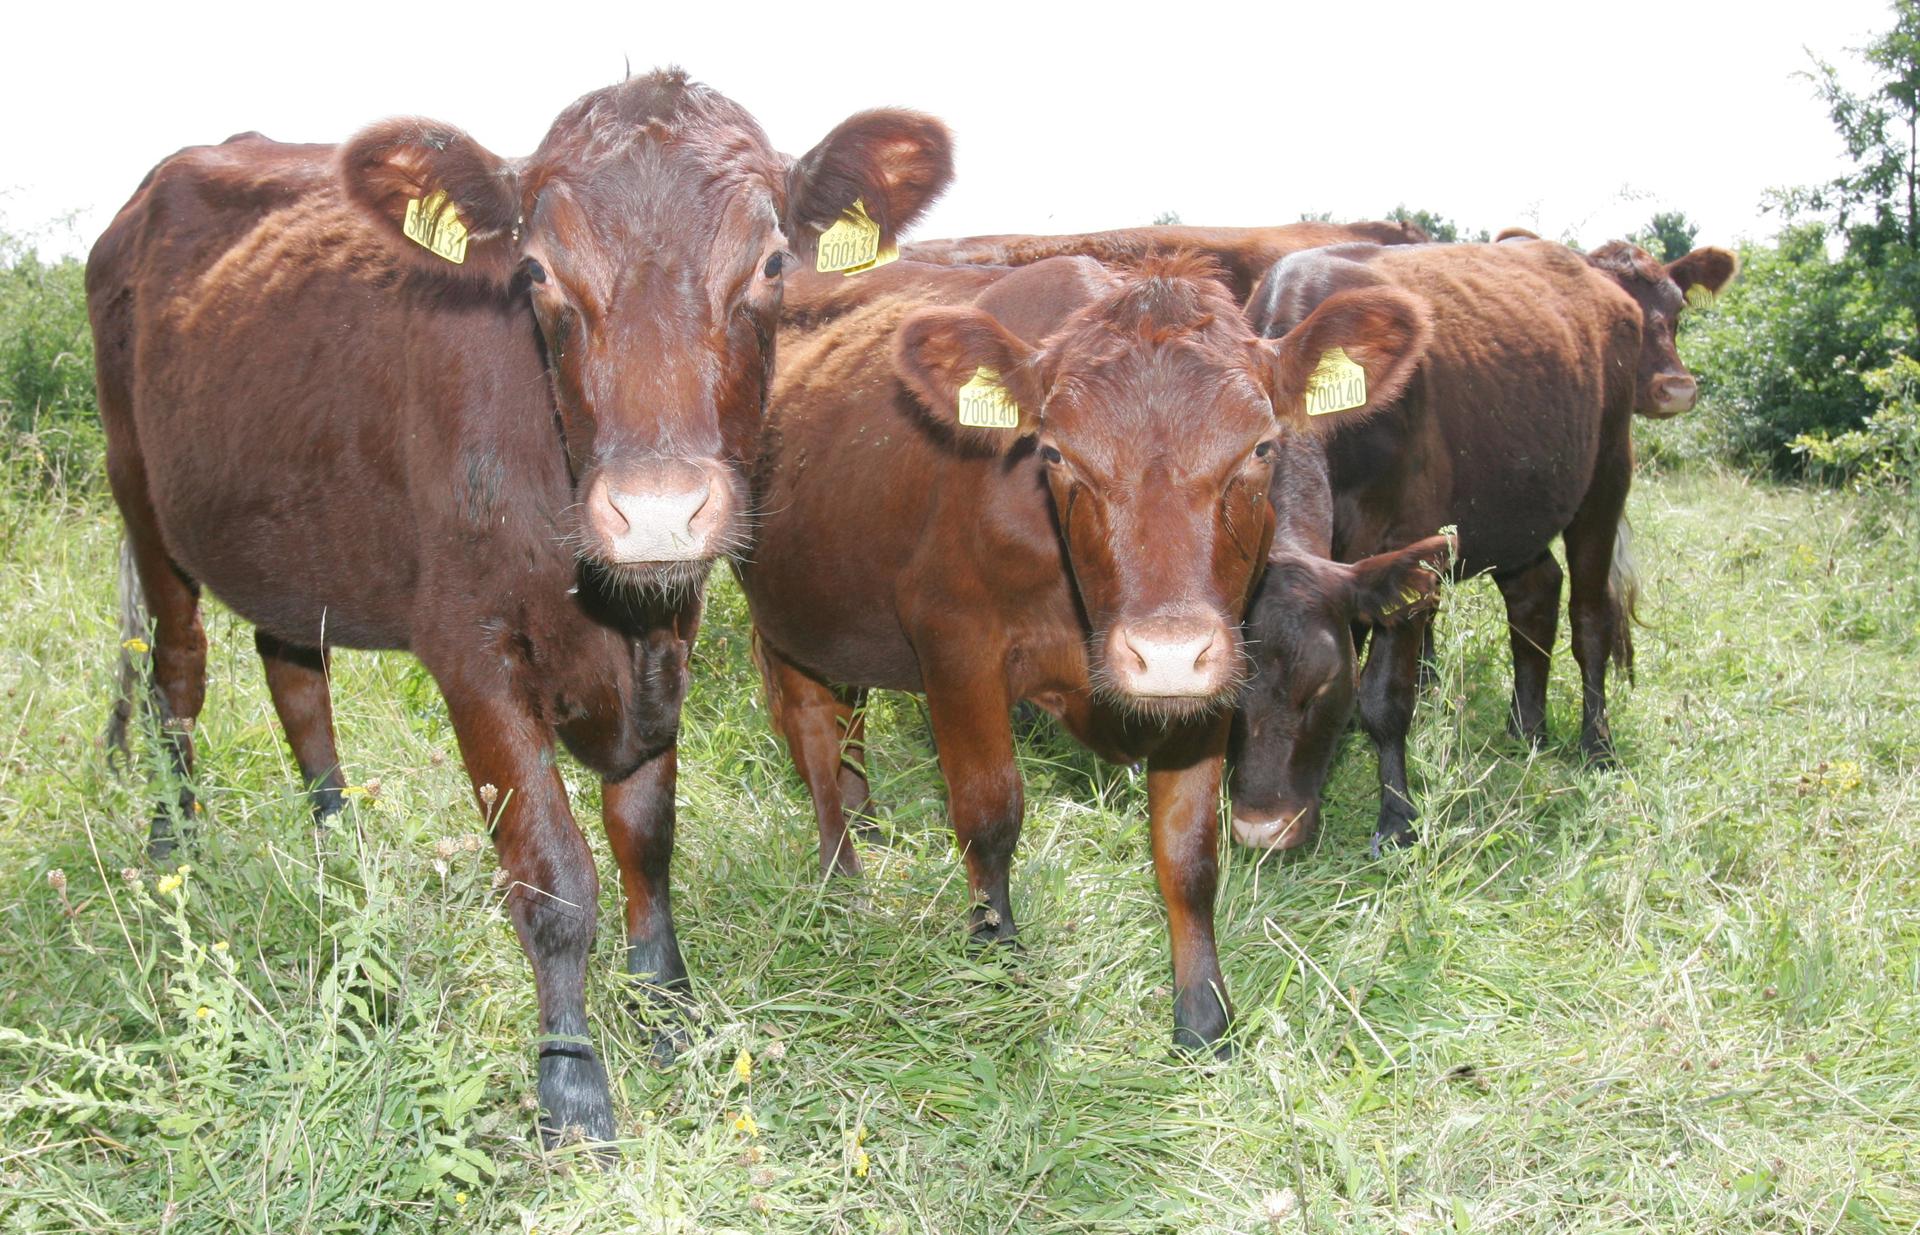 Red Poll cattle have been called in to help manage the species-rich meadows around Havering, England that are home to many wildflowers, bees and bird species.